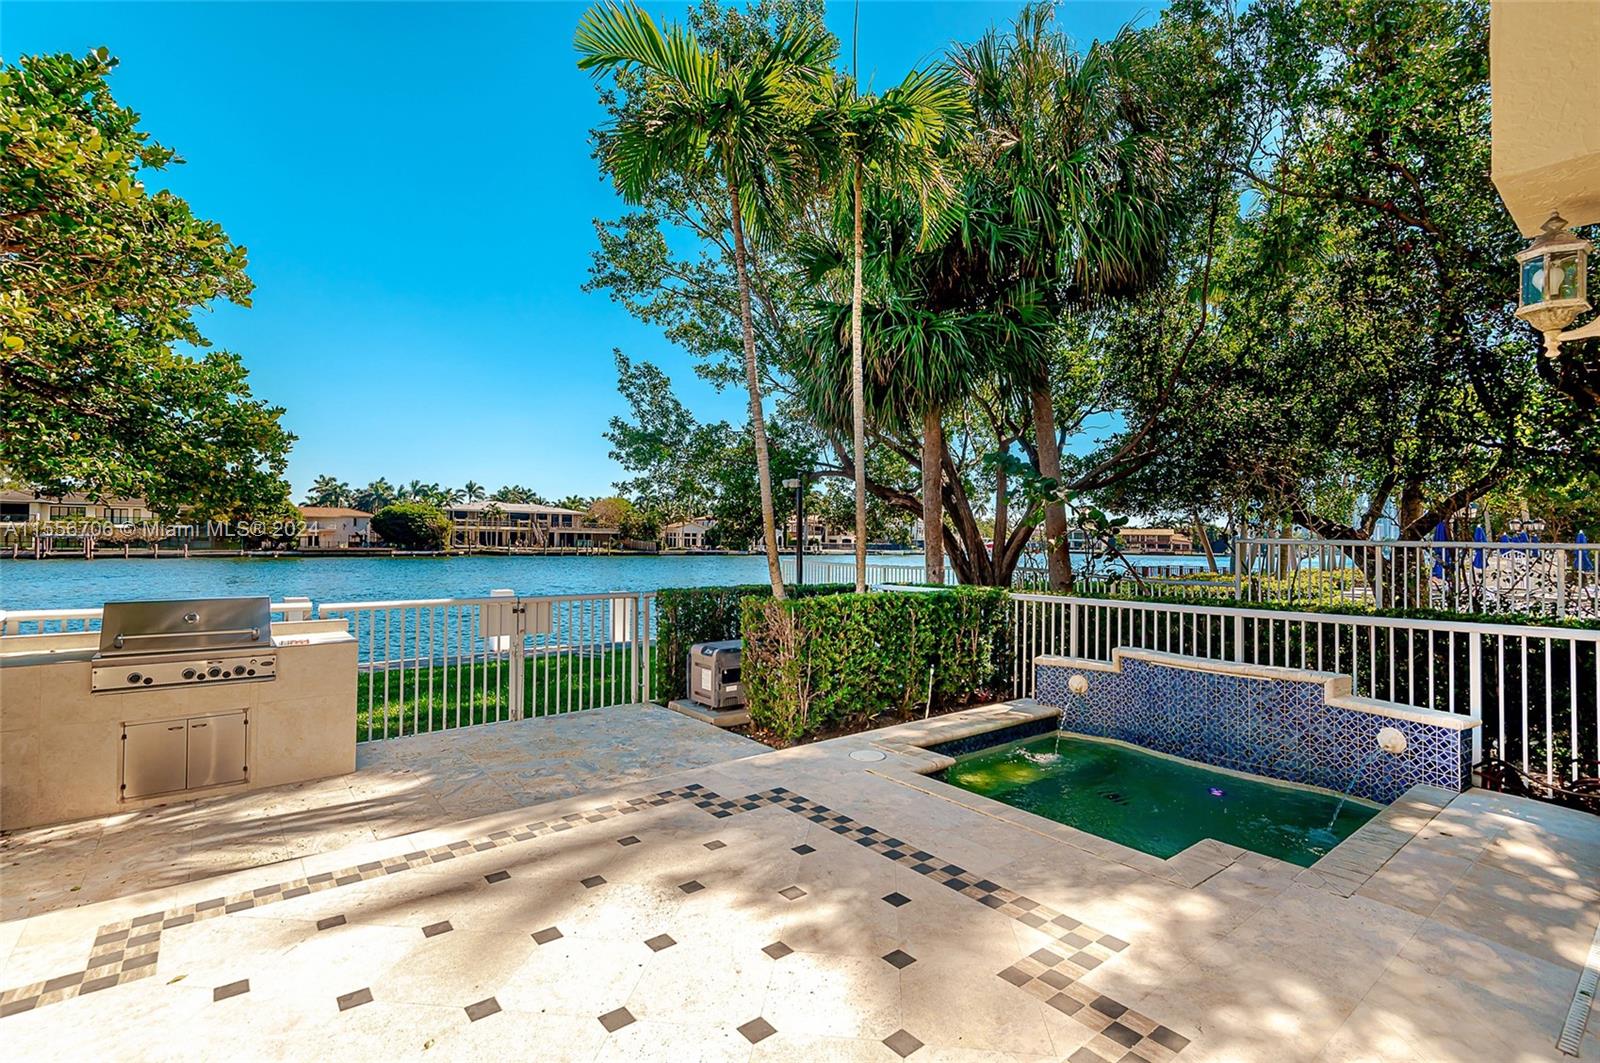 Showings to start July 24, 2024 morning, call listing agents. Corner unit, directly on the Intracoastal waterway with fantastic views, deeded boat dock, the unit has the largest driveway that can fit at least 8 cars plus 2 car garage. Separate entrance full bedroom with full bathroom. Beautiful eat in kitchen, marble floors first floor, wood floors second floor, spa in the backyard, built-in grill and it's conveniently located next to the community pool. Maintenance includes the use of the community spa, tennis courts, security gate house, walk to the Waterways shops and Aventura Mall is just minutes away. The property is currently rented, please do not disturb the tenants, call the listing agents for an appointment